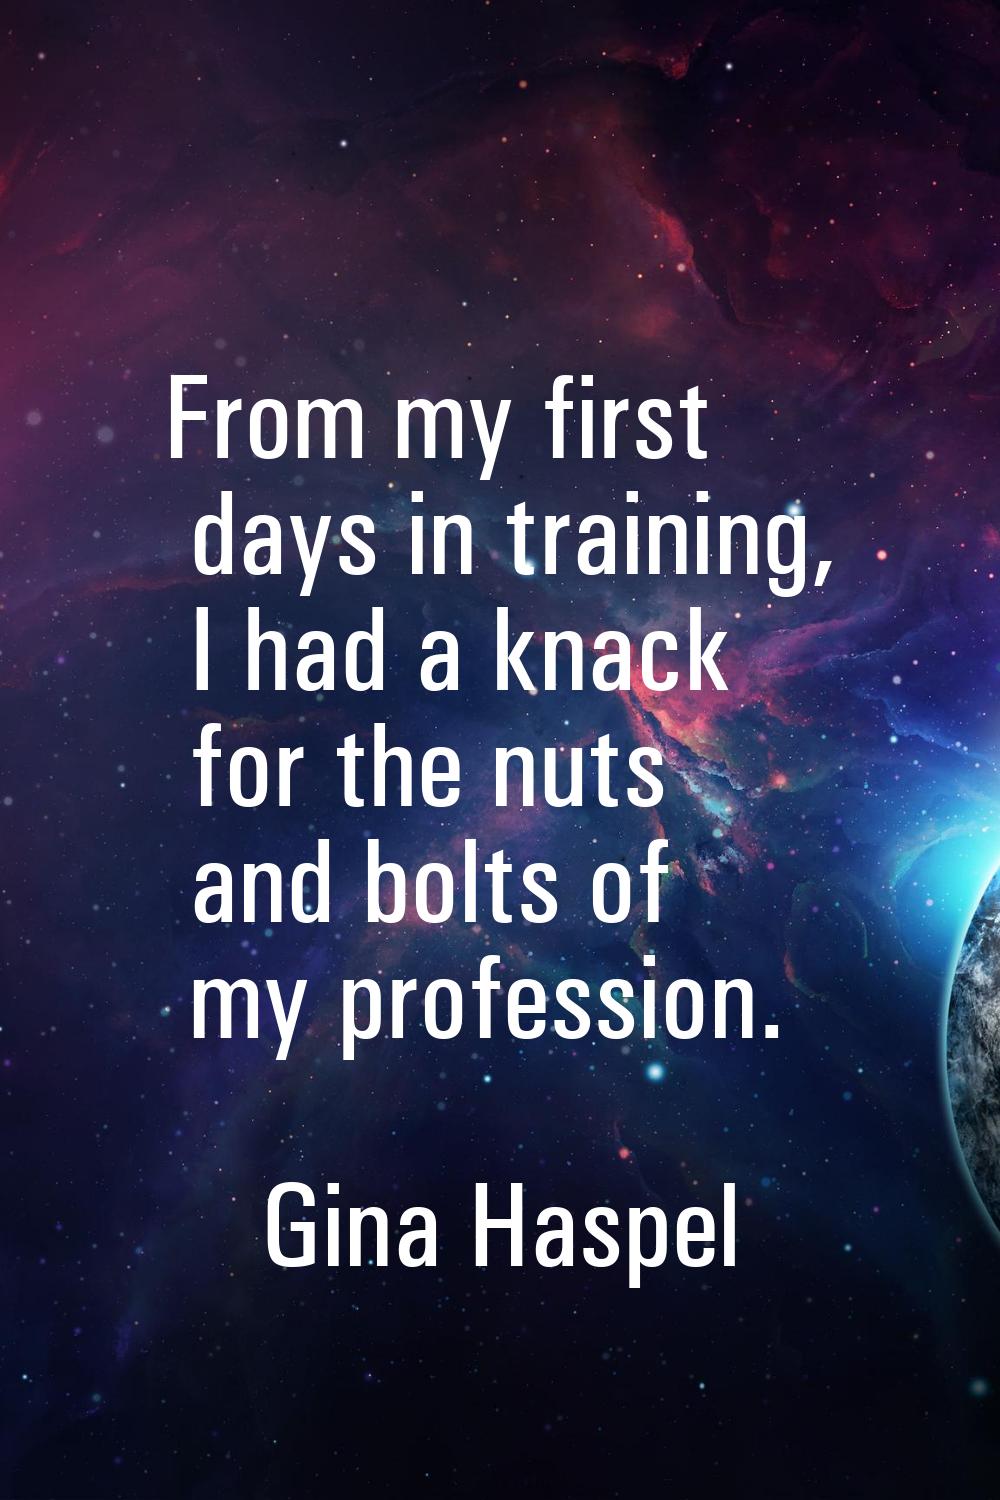 From my first days in training, I had a knack for the nuts and bolts of my profession.